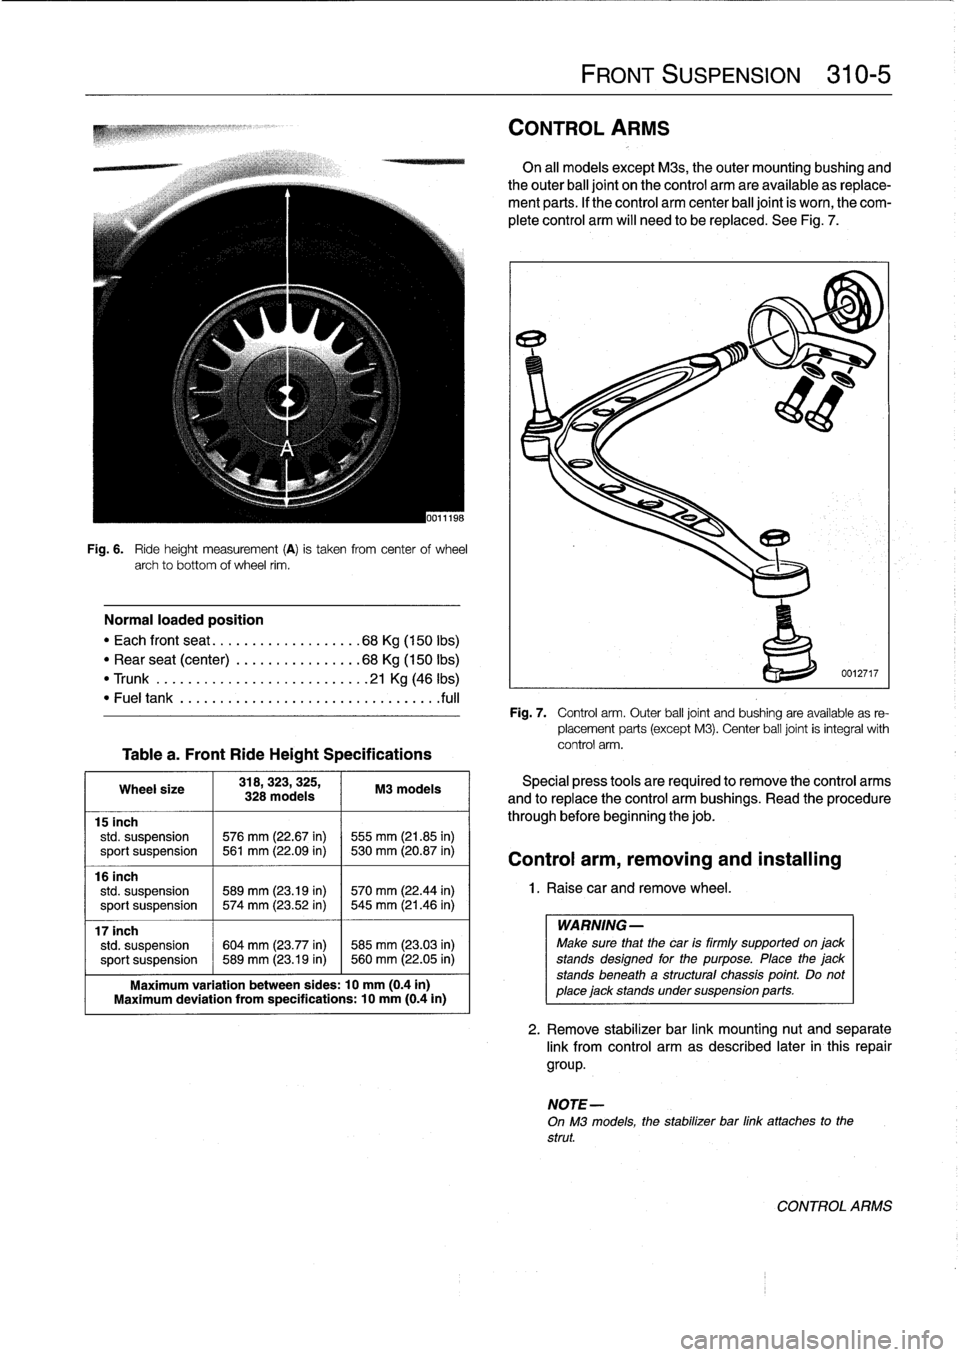 BMW 318i 1997 E36 Workshop Manual 
Fig
.
6
.

	

Ride
height
measurement
(A)
is
taken
from
centerof
wheel
archto
bottom
of
wheel
rim
.

Normal
loaded
position

"
Each
front
seat
...
...
.
..
..........
68Kg
(150
Ibs)

"
Rear
seat
(cen